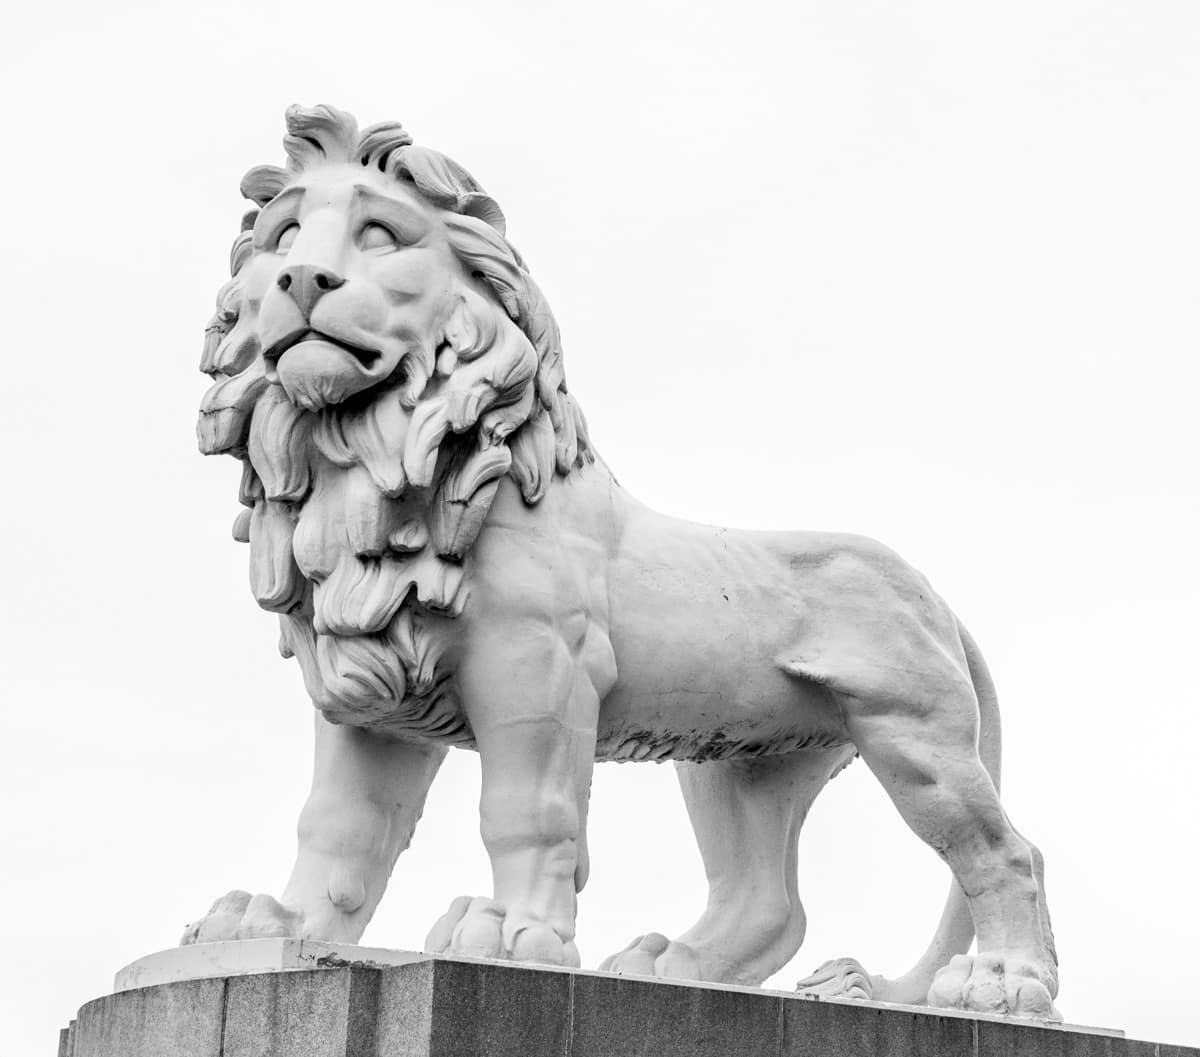 This lion, cast in the early 1800s, is made from an artifical material called Coade Stone. It resists weathering; hence, the sculpture looks almost brand new. The sculpture was out of a home when the brewery it adorned was demolished in 1949. However, King George VI ensured it was saved and later placed on a plinth on theeast end of the Westminster Bridge.